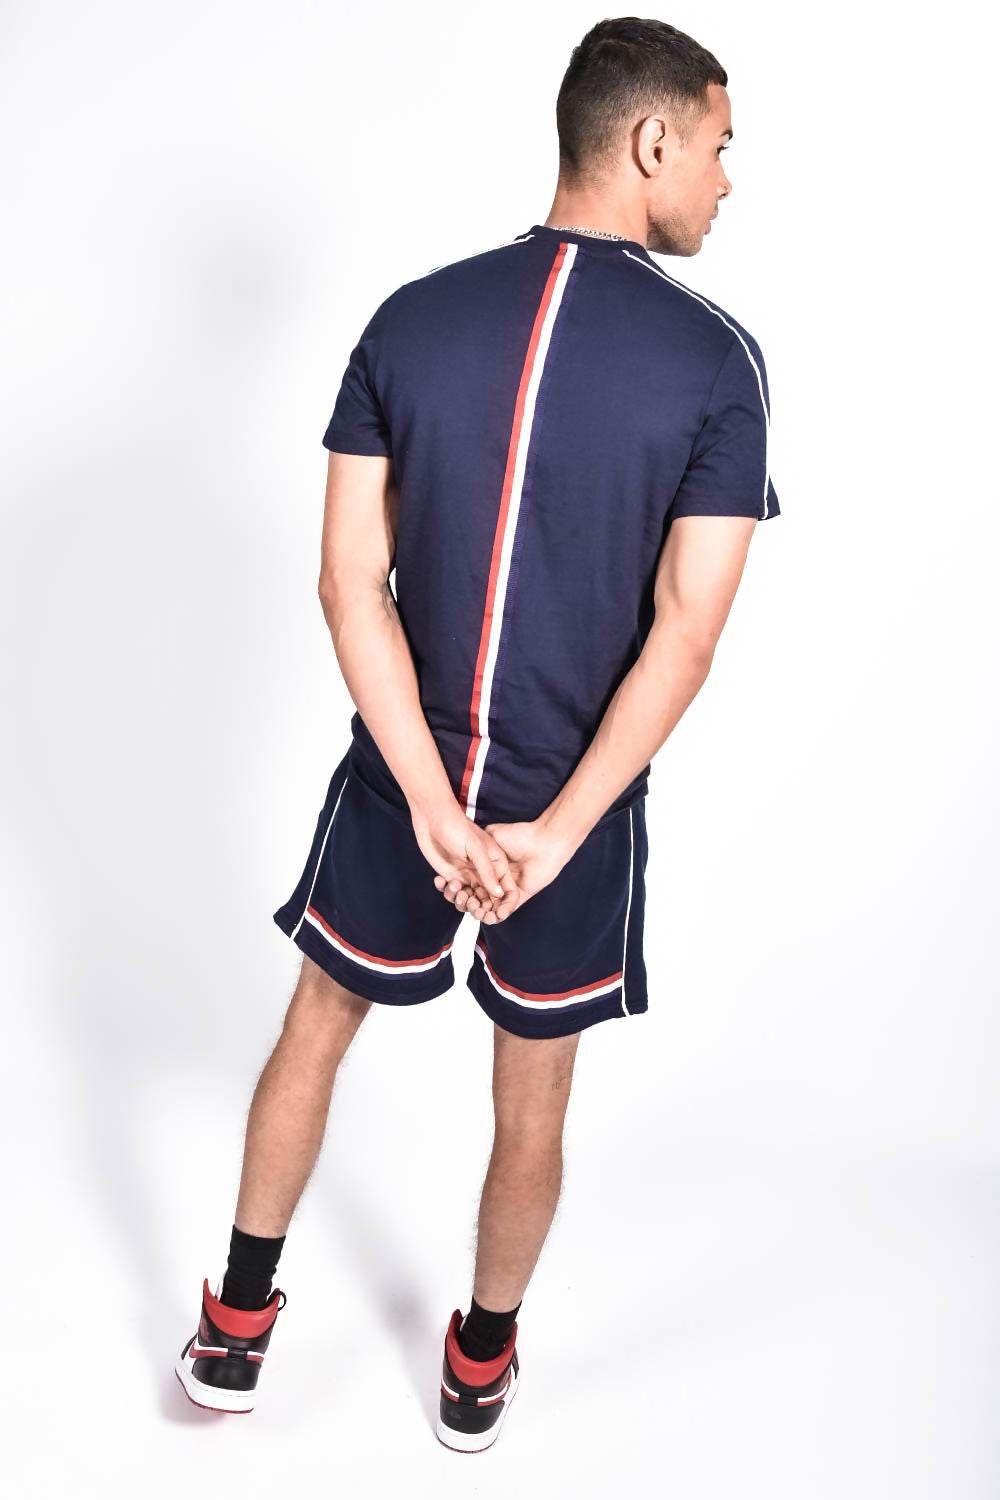 MENS TAPE STRIPED BACK PIPED SHORT SET NAVY